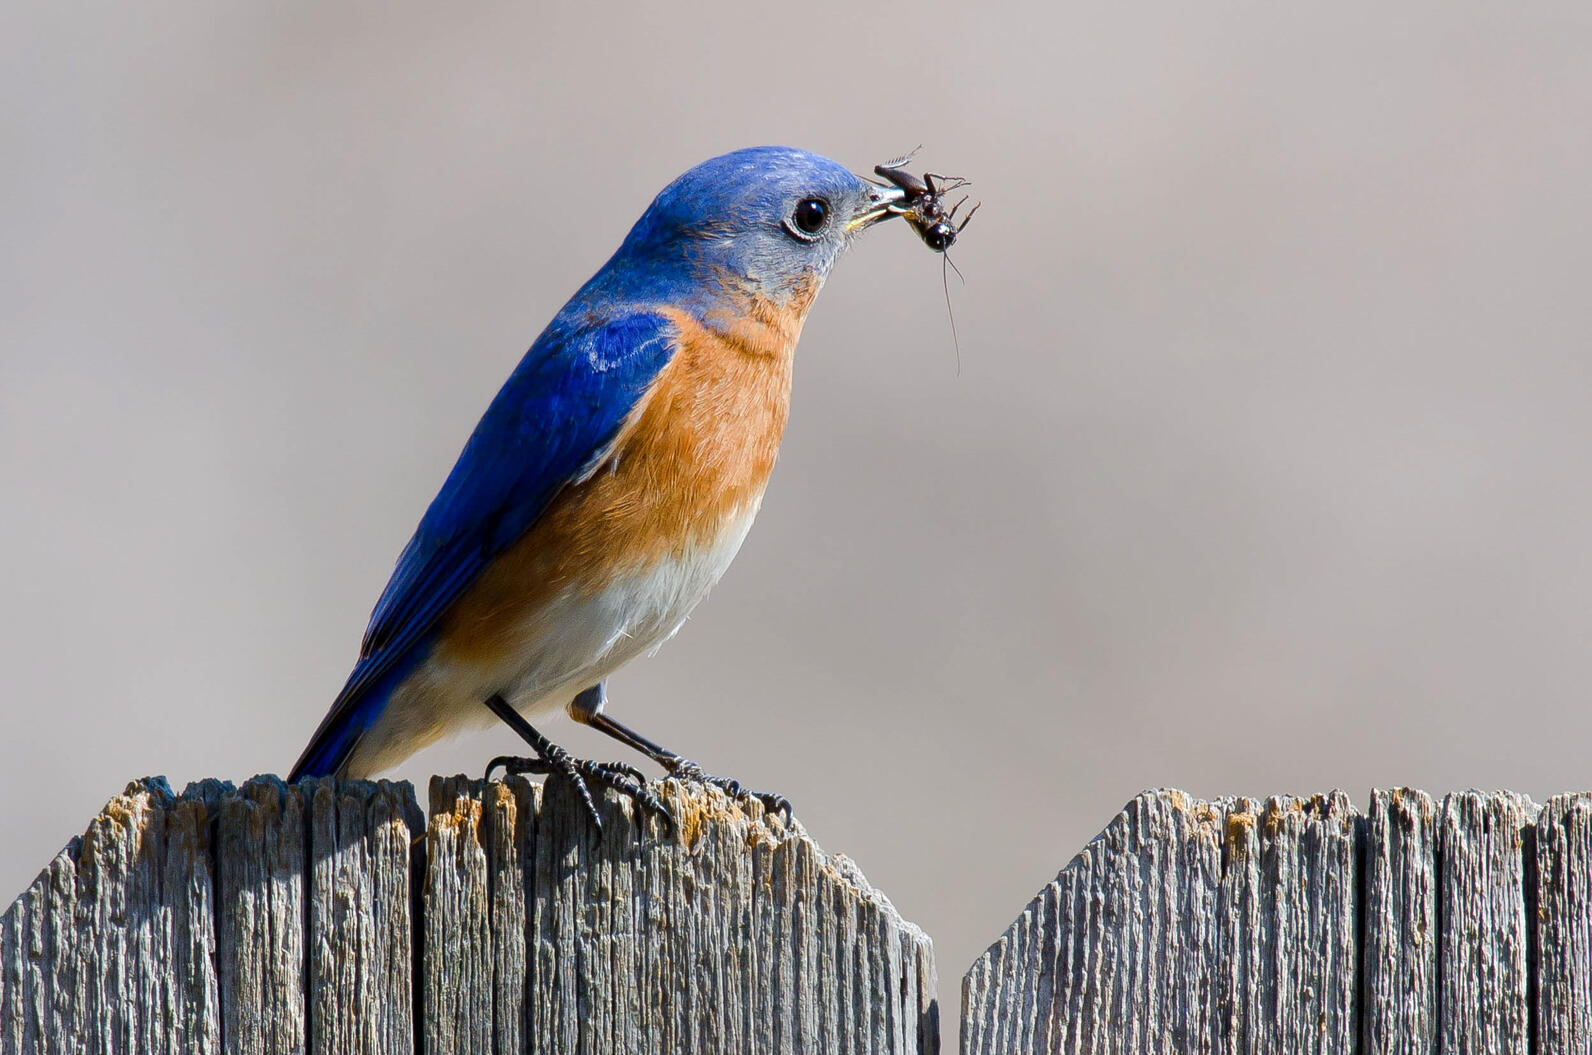 A make eastern bluebird perches on a fence and holds an insect in his beak